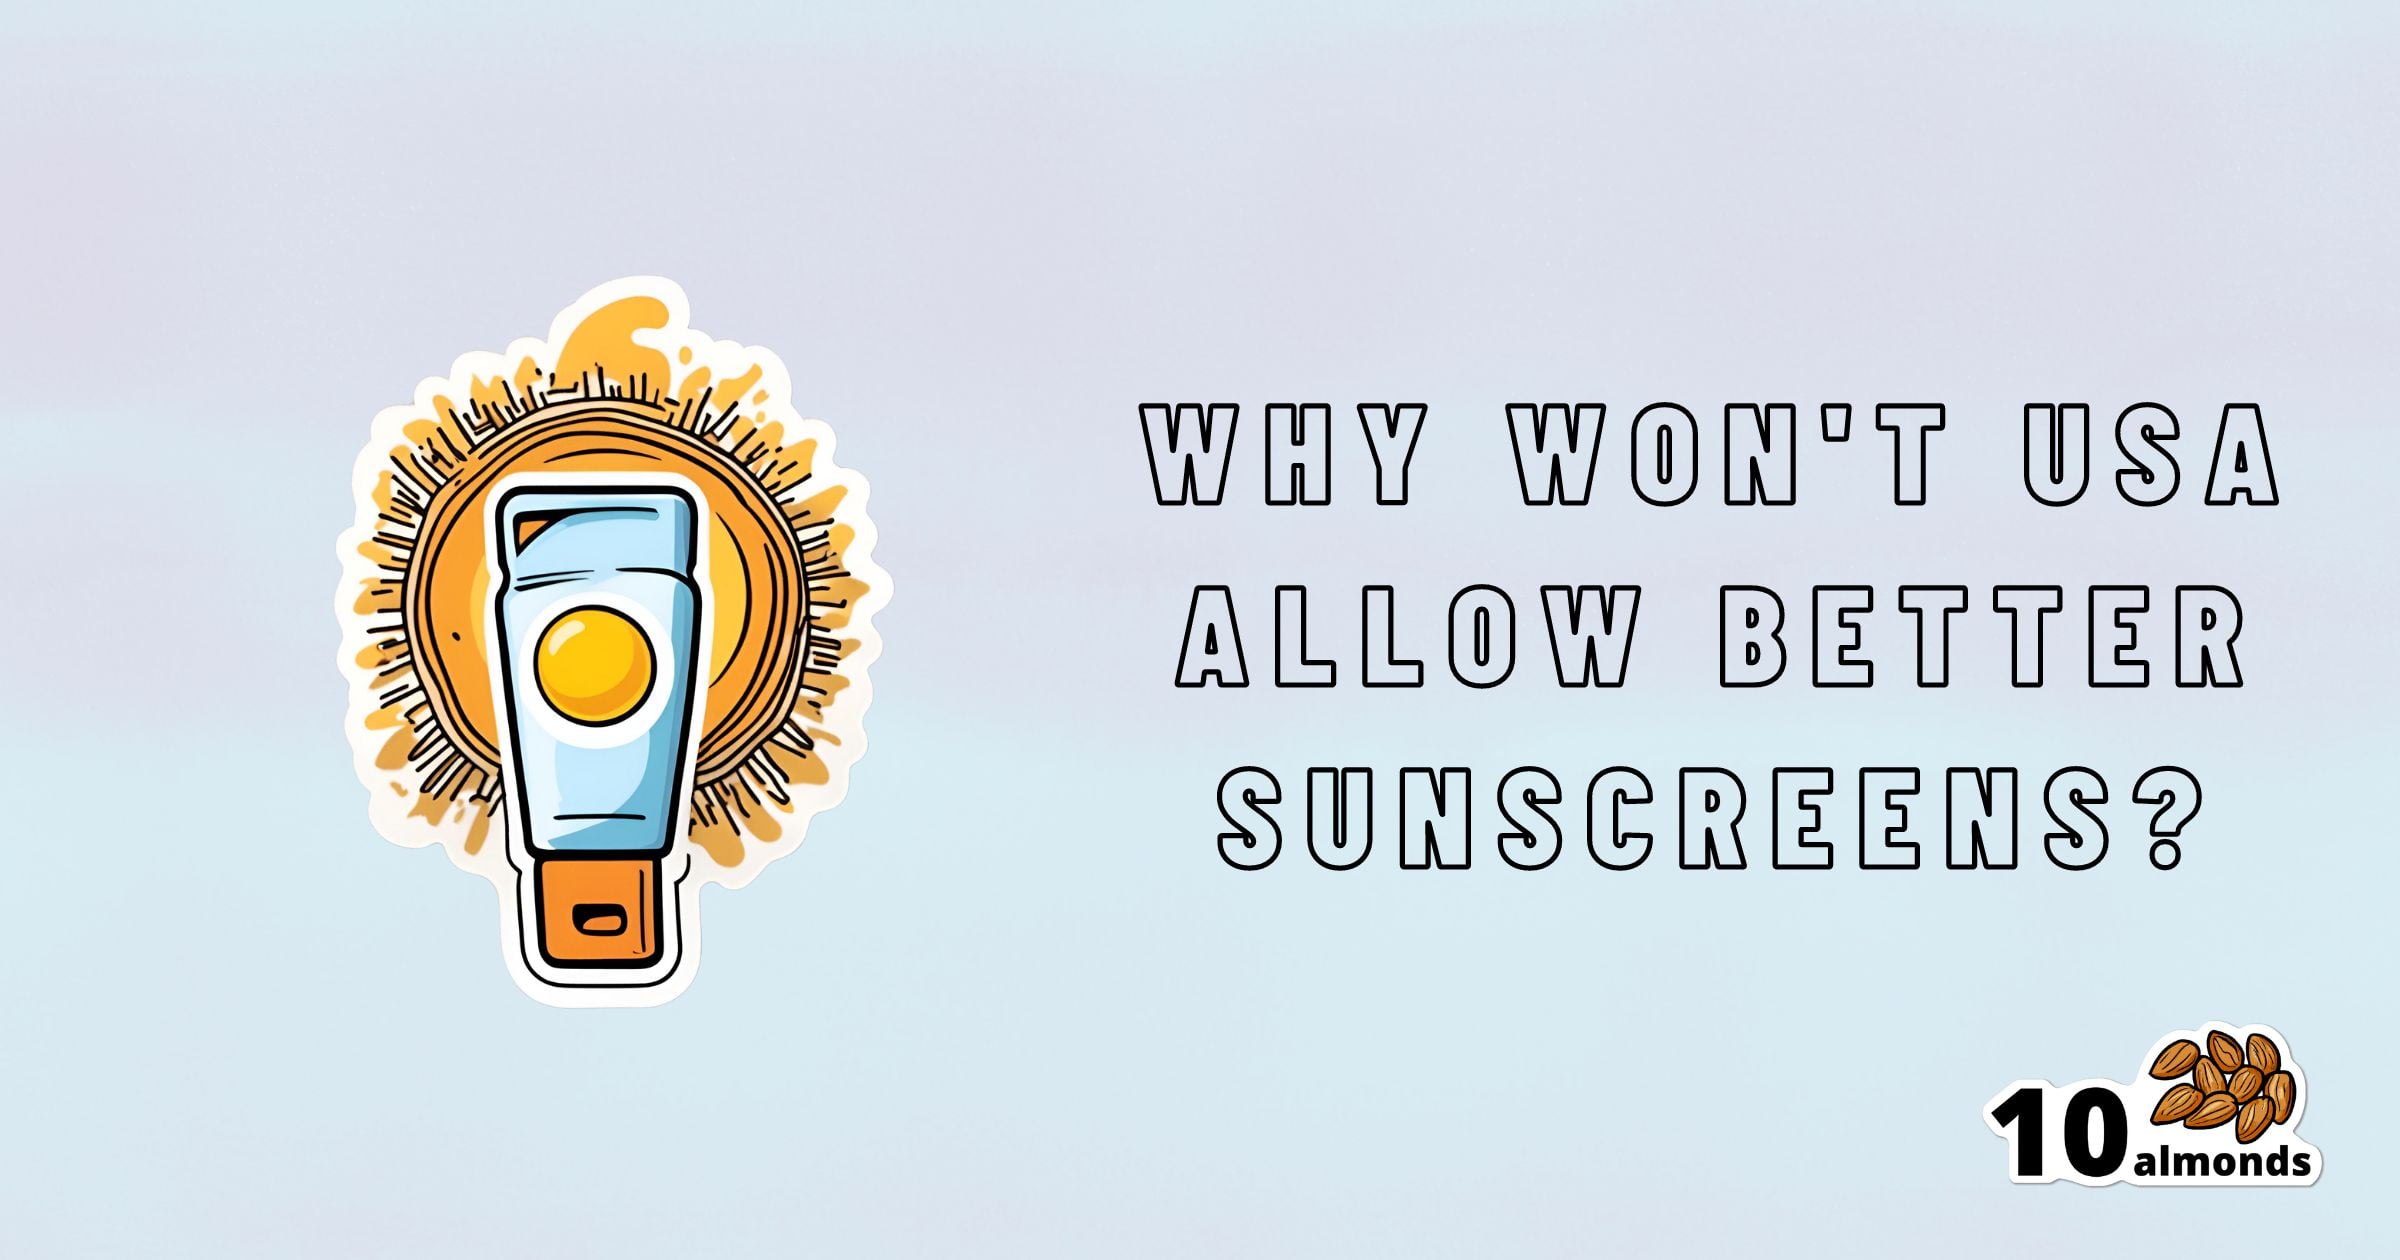 A graphic image with a sunscreen bottle and sun illustration on the left, accompanied by the text "Why won't US sunscreen policy allow better sunscreens?" on the right. The bottom right corner features the "10 almonds" logo with an image of 10 almonds next to it.